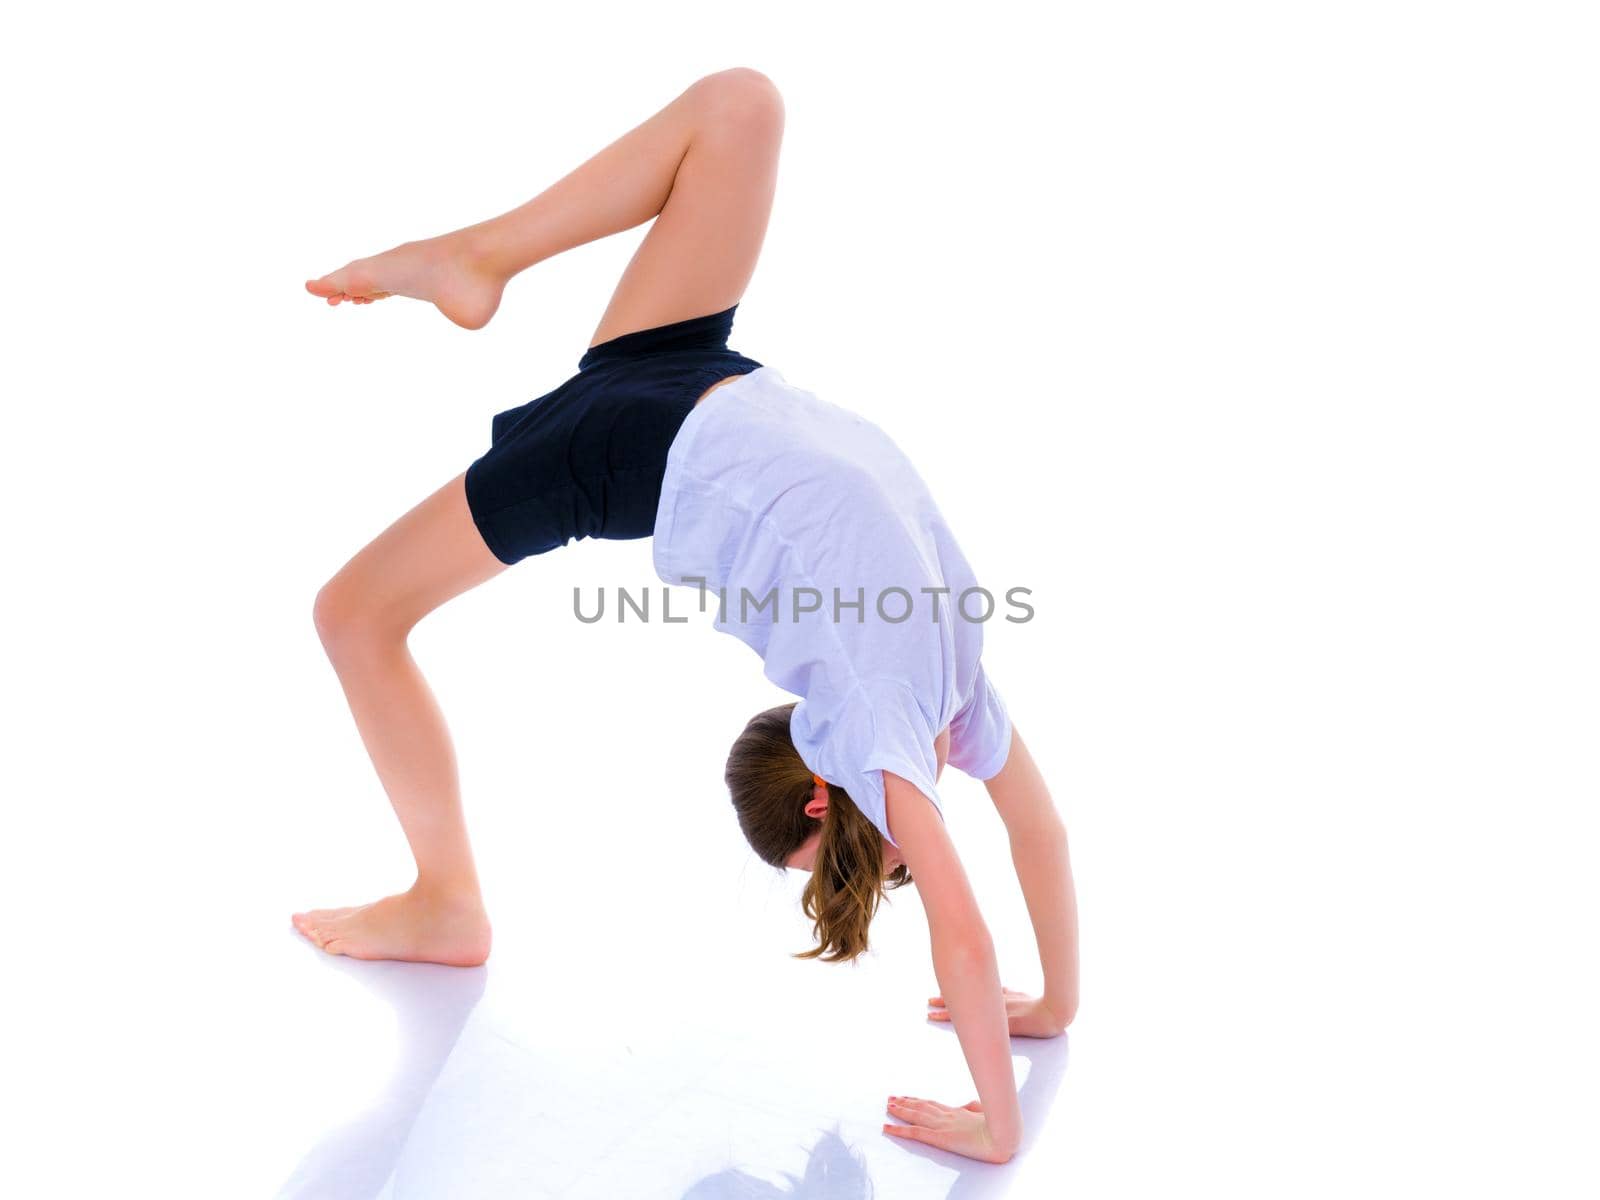 A girl gymnast performs an acrobatic element on the floor. The concept of childhood, sport, healthy lifestyle. Isolated on white background.